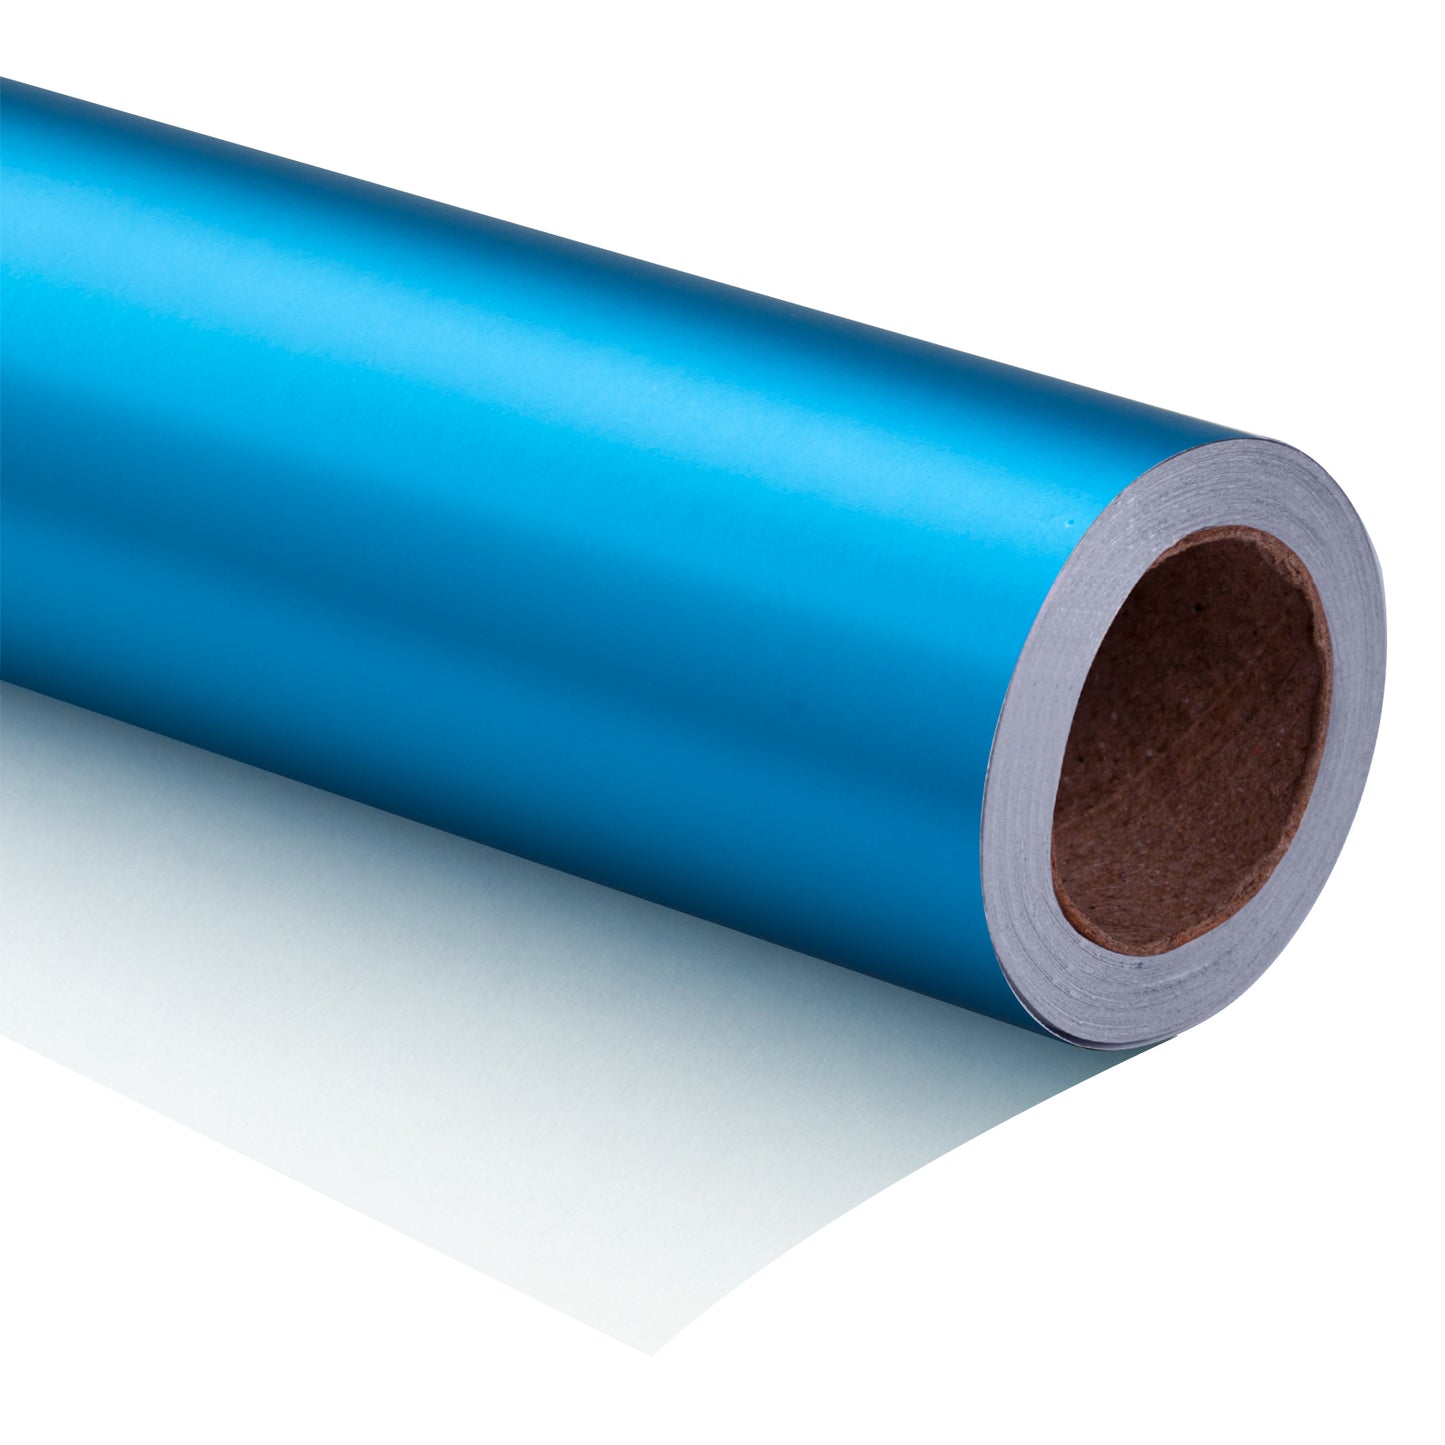 Matte Metallic Wrapping Paper Roll Turquoise Ream Wholesale Wrapaholic